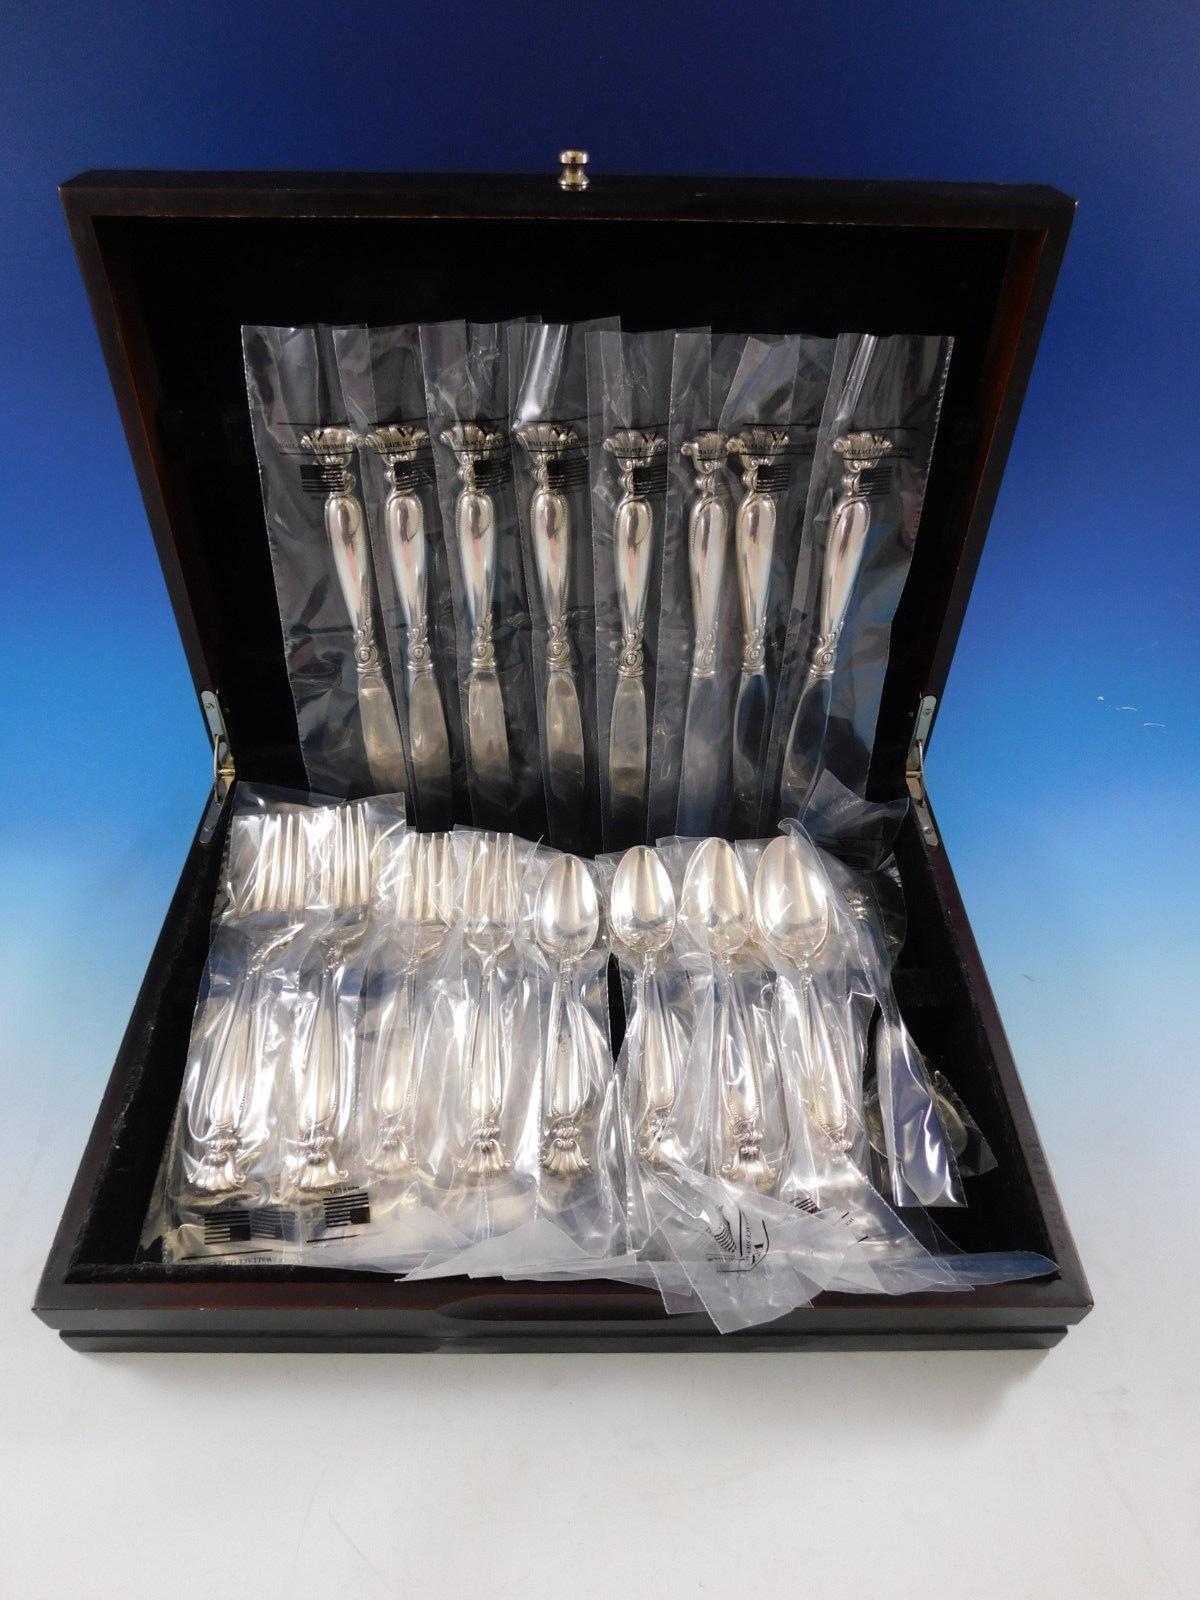 New, unused Romance of the sea by Wallace sterling silver flatware set, 42 pieces. This set includes:

8 knives, 9 1/8